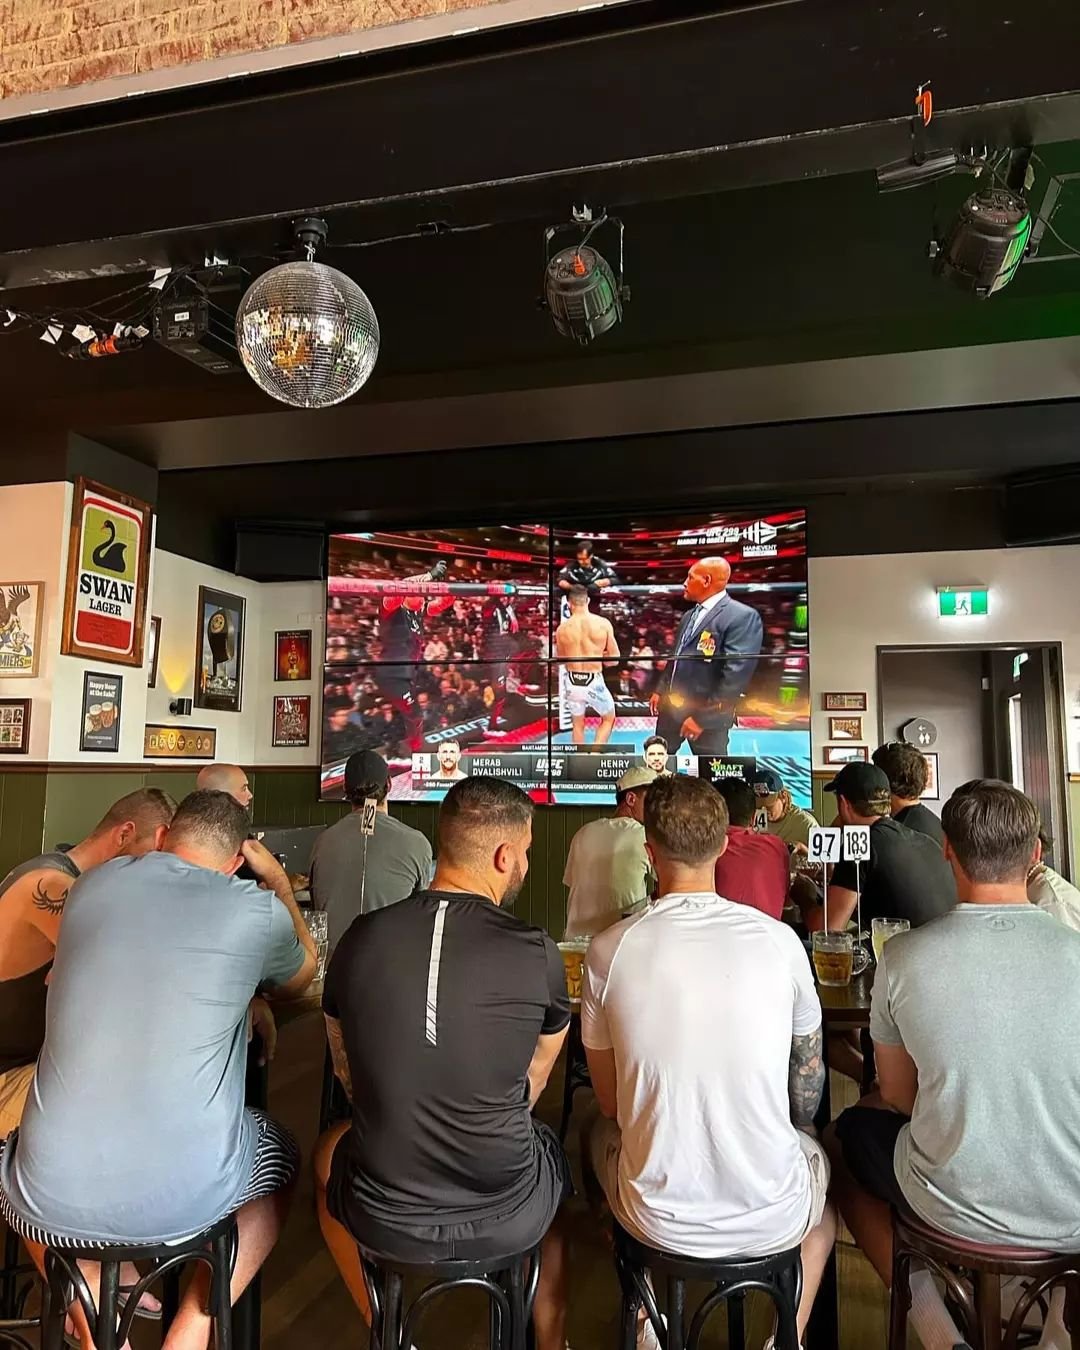 Don't forget to head down to the Subi tomorrow for the UFC 300&nbsp;🥊

We will be open from 9am with our chefs serving bites early! So you can catch all the action live and loud.

For bookings follow the link in our bio.